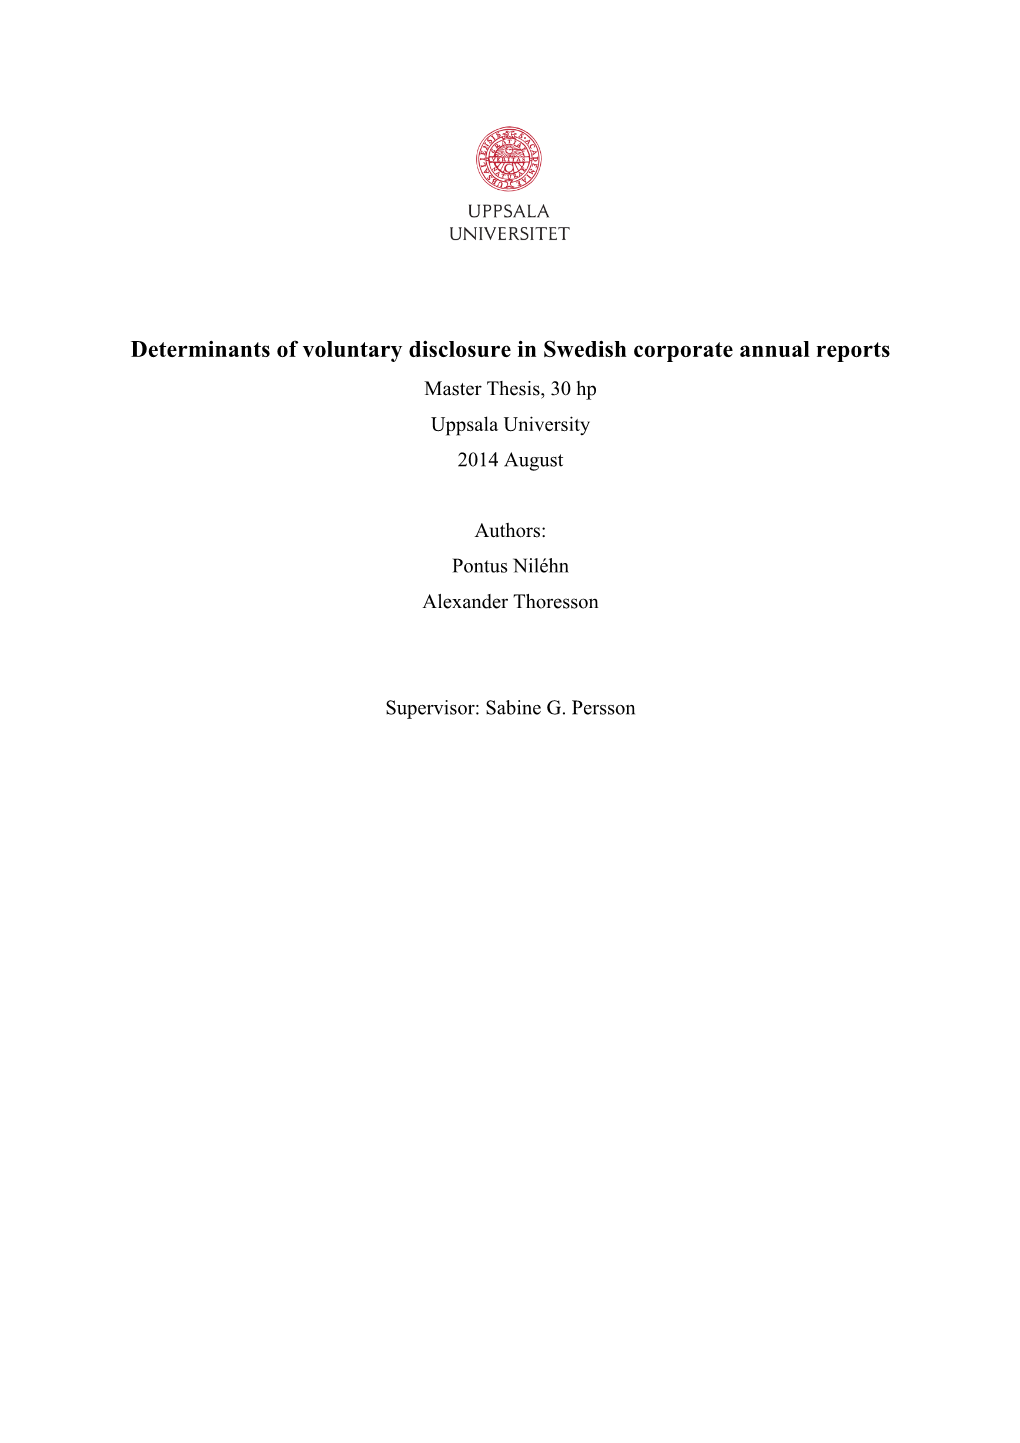 Determinants of Voluntary Disclosure in Swedish Corporate Annual Reports Master Thesis, 30 Hp Uppsala University 2014 August